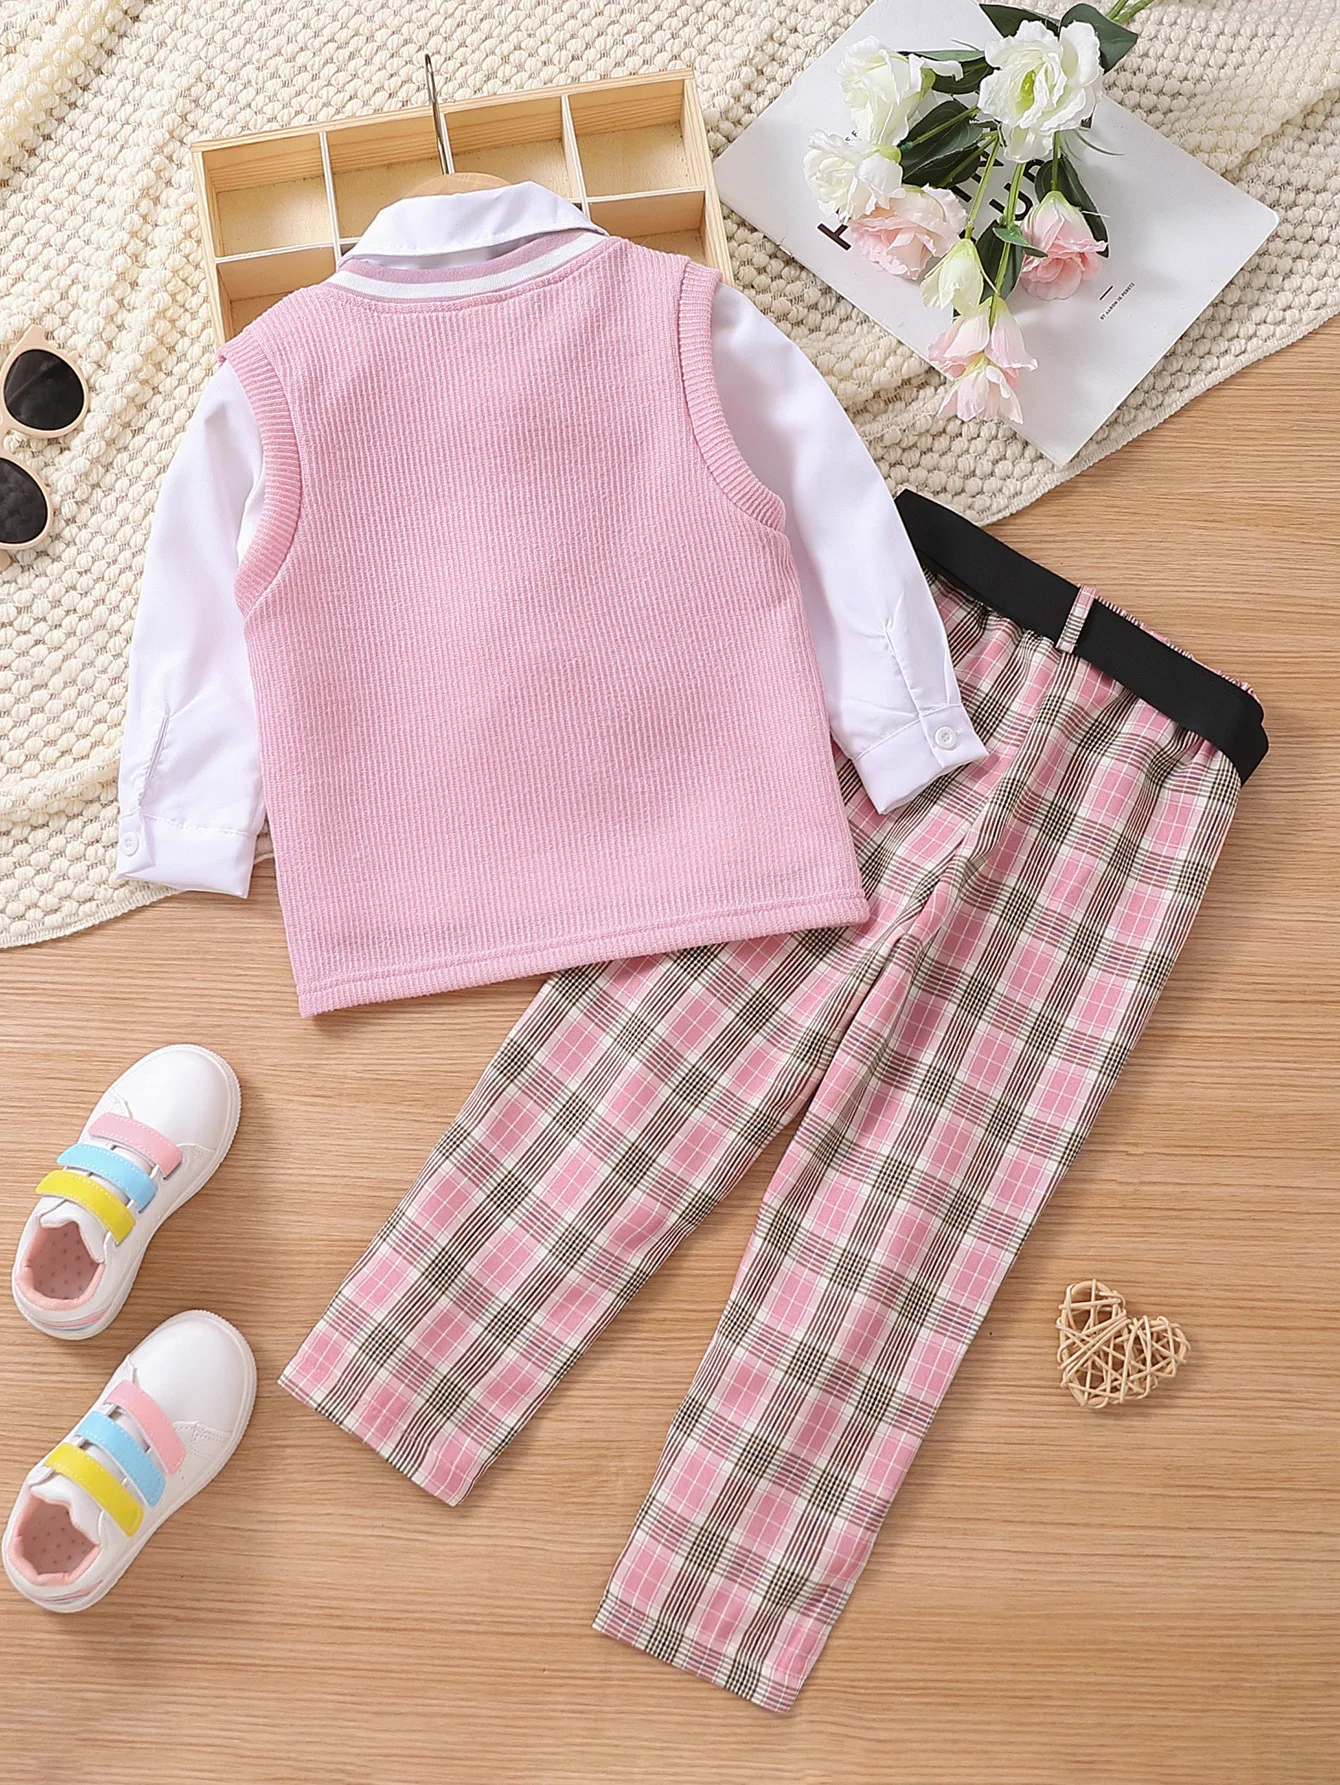 Toddler kids clothing outfits little girls preppy style shirt match sweater vest+pink plaid pants kids boutique outfits